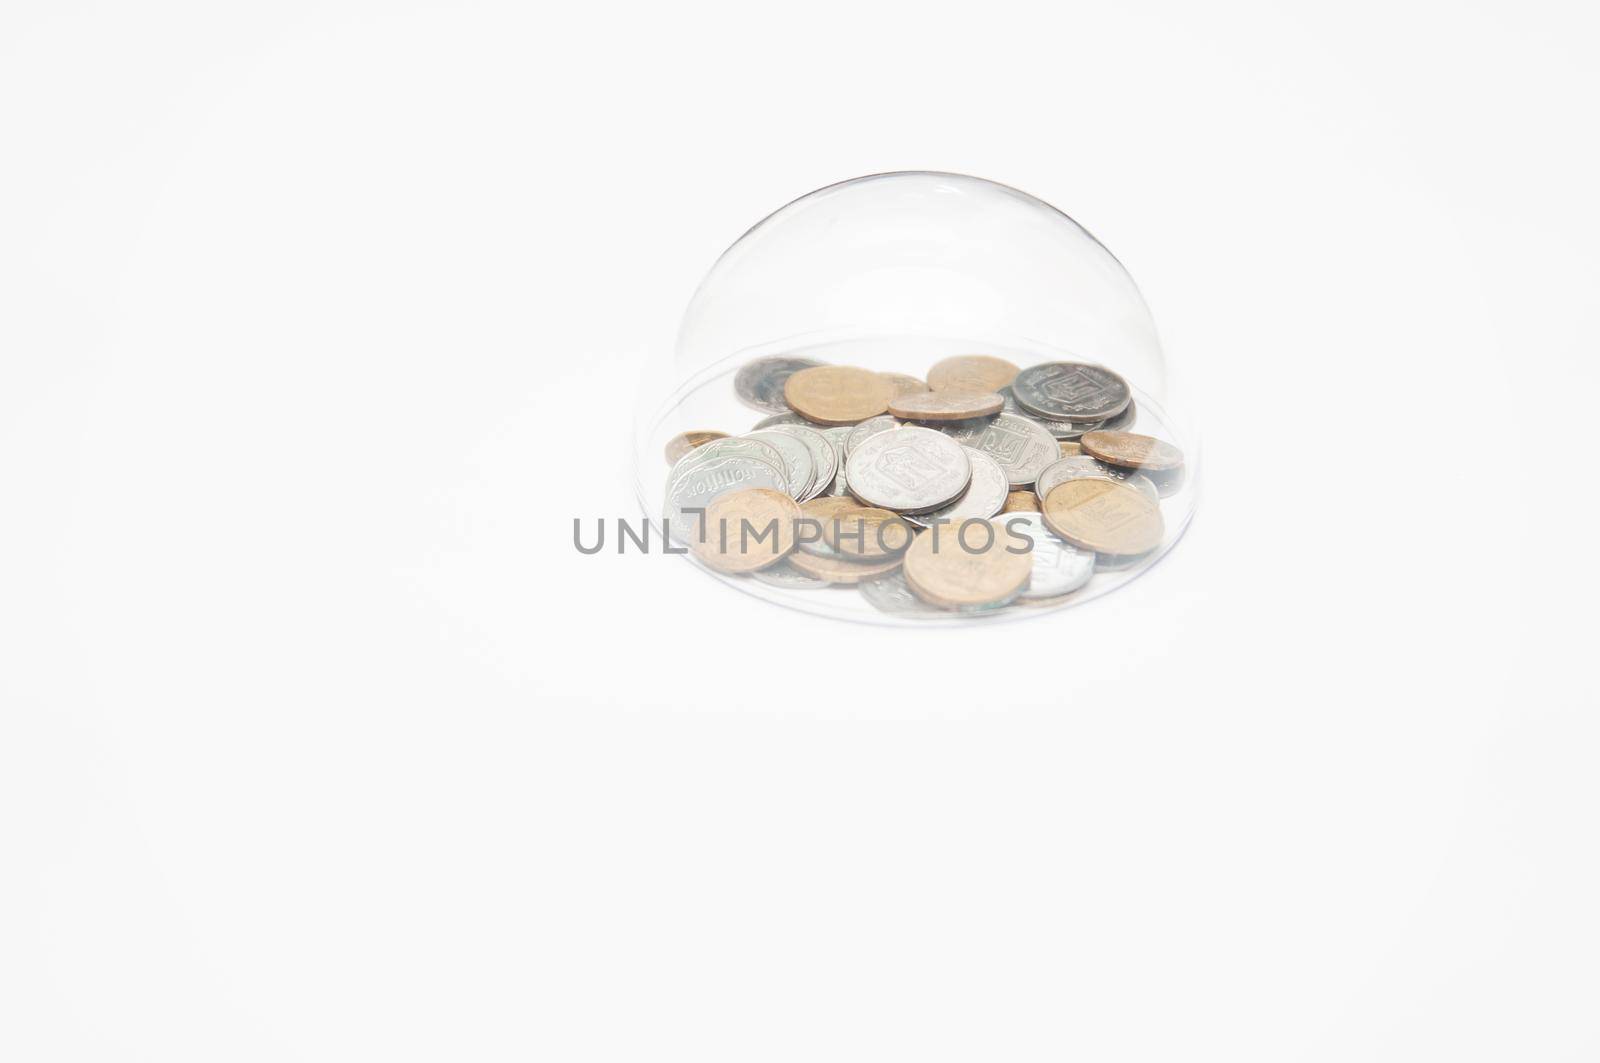 metal coins are grouped under a glass semicircle on a white background